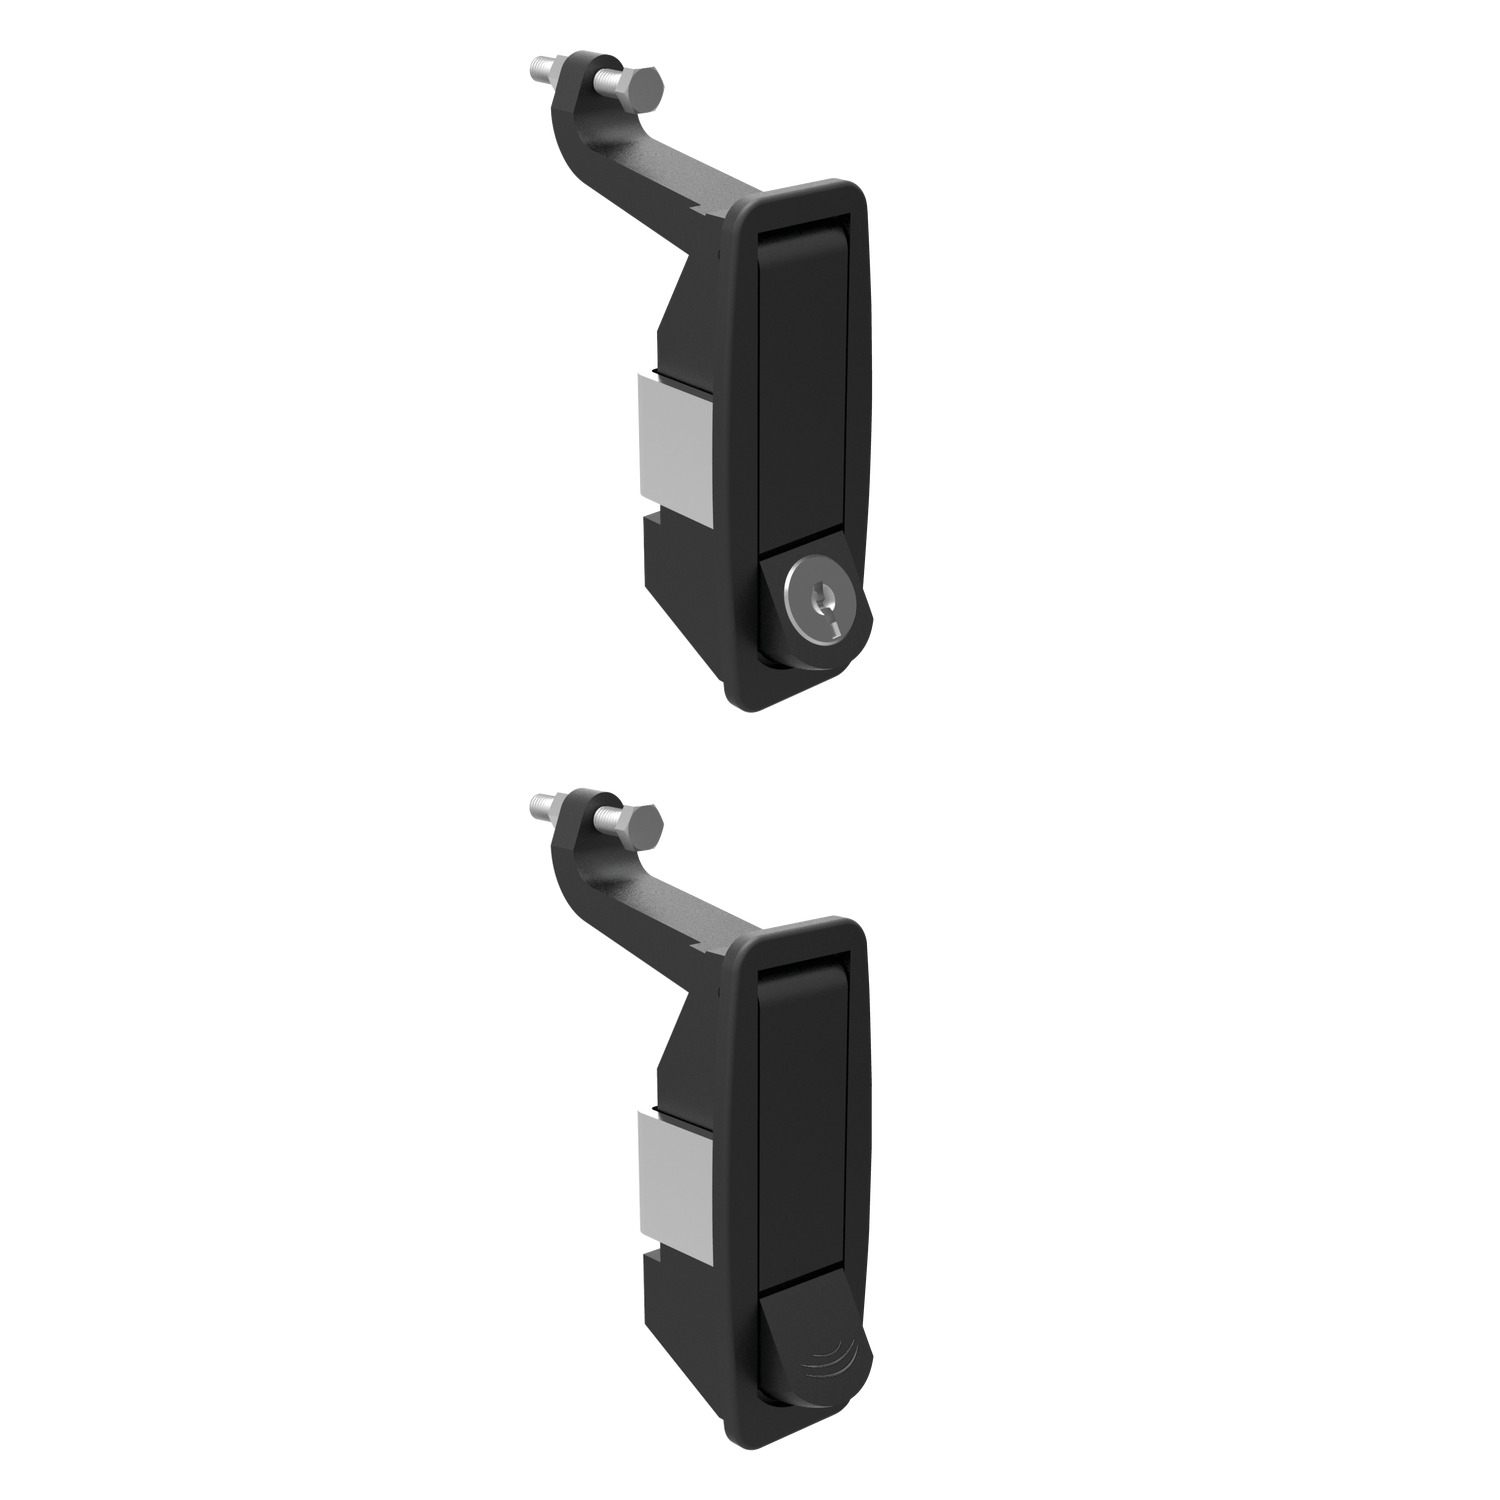 Compression Locks Grip length can be adjusted via screw between 1 and 20mm. Suitable for panel thickness 1-20mm.